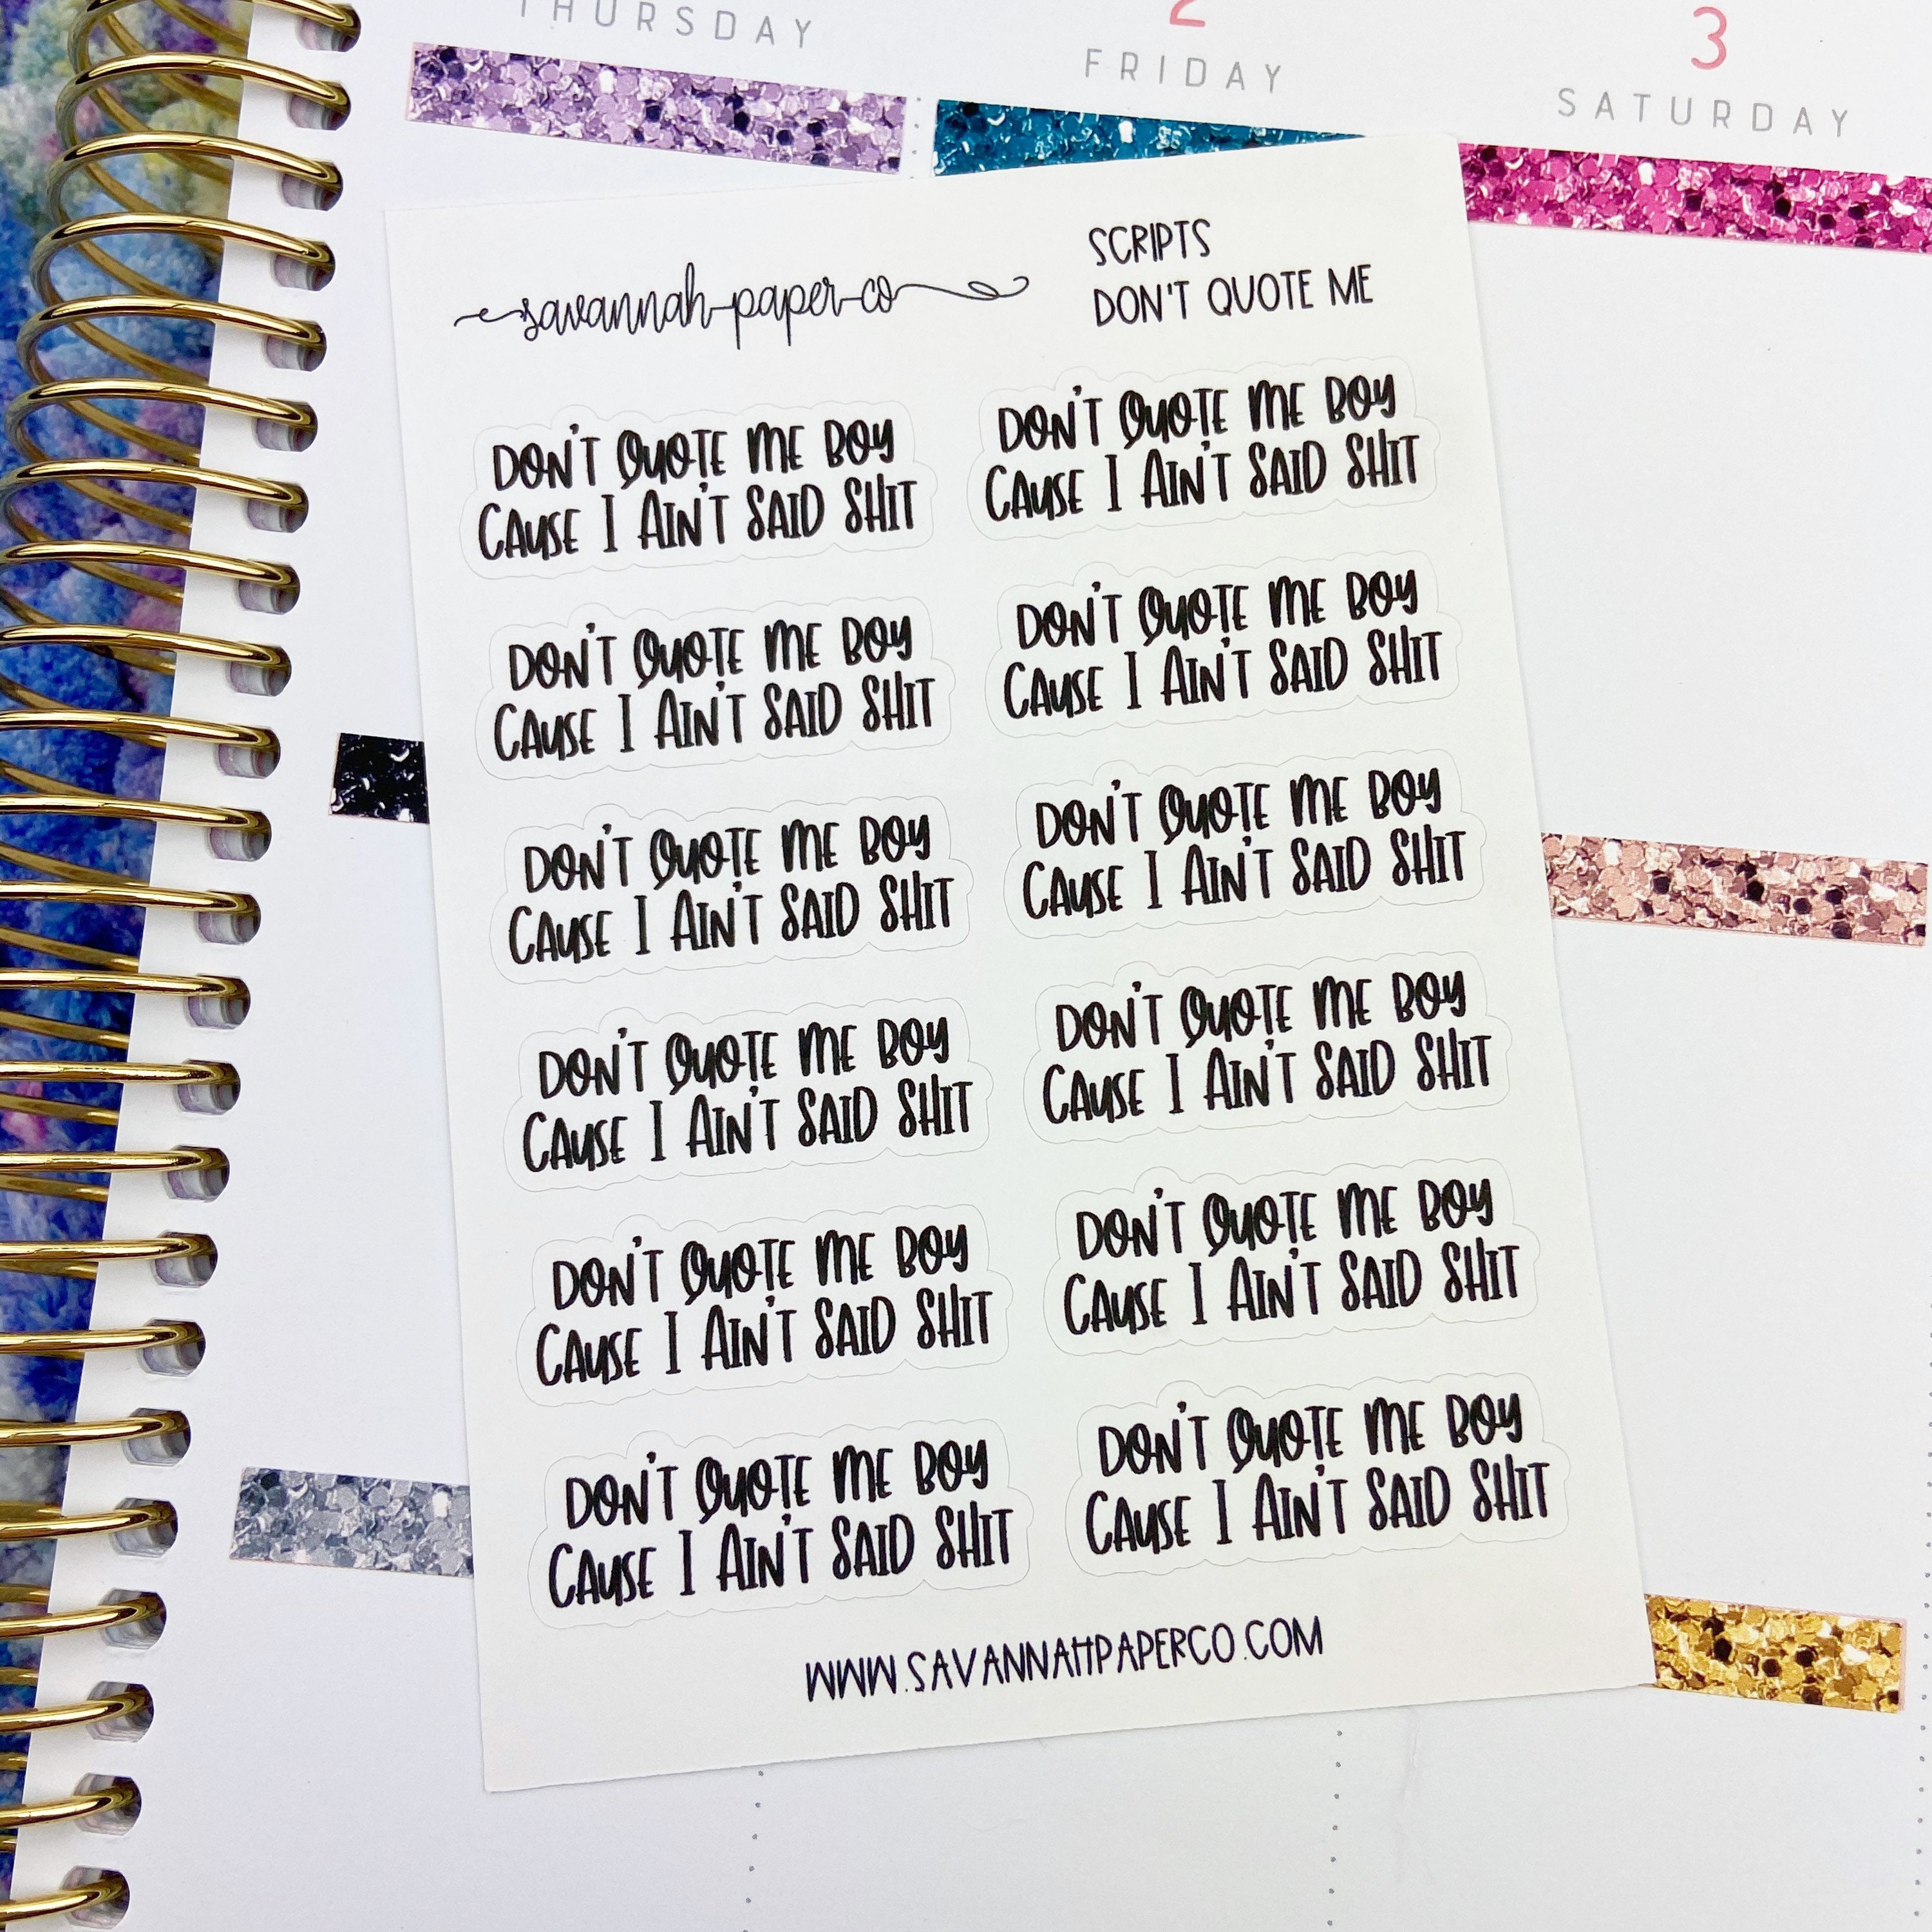 Don T Quote Me Boy Script Stickers Words Motivational Functional Stickers Planner Stickers Savannah Paper Co